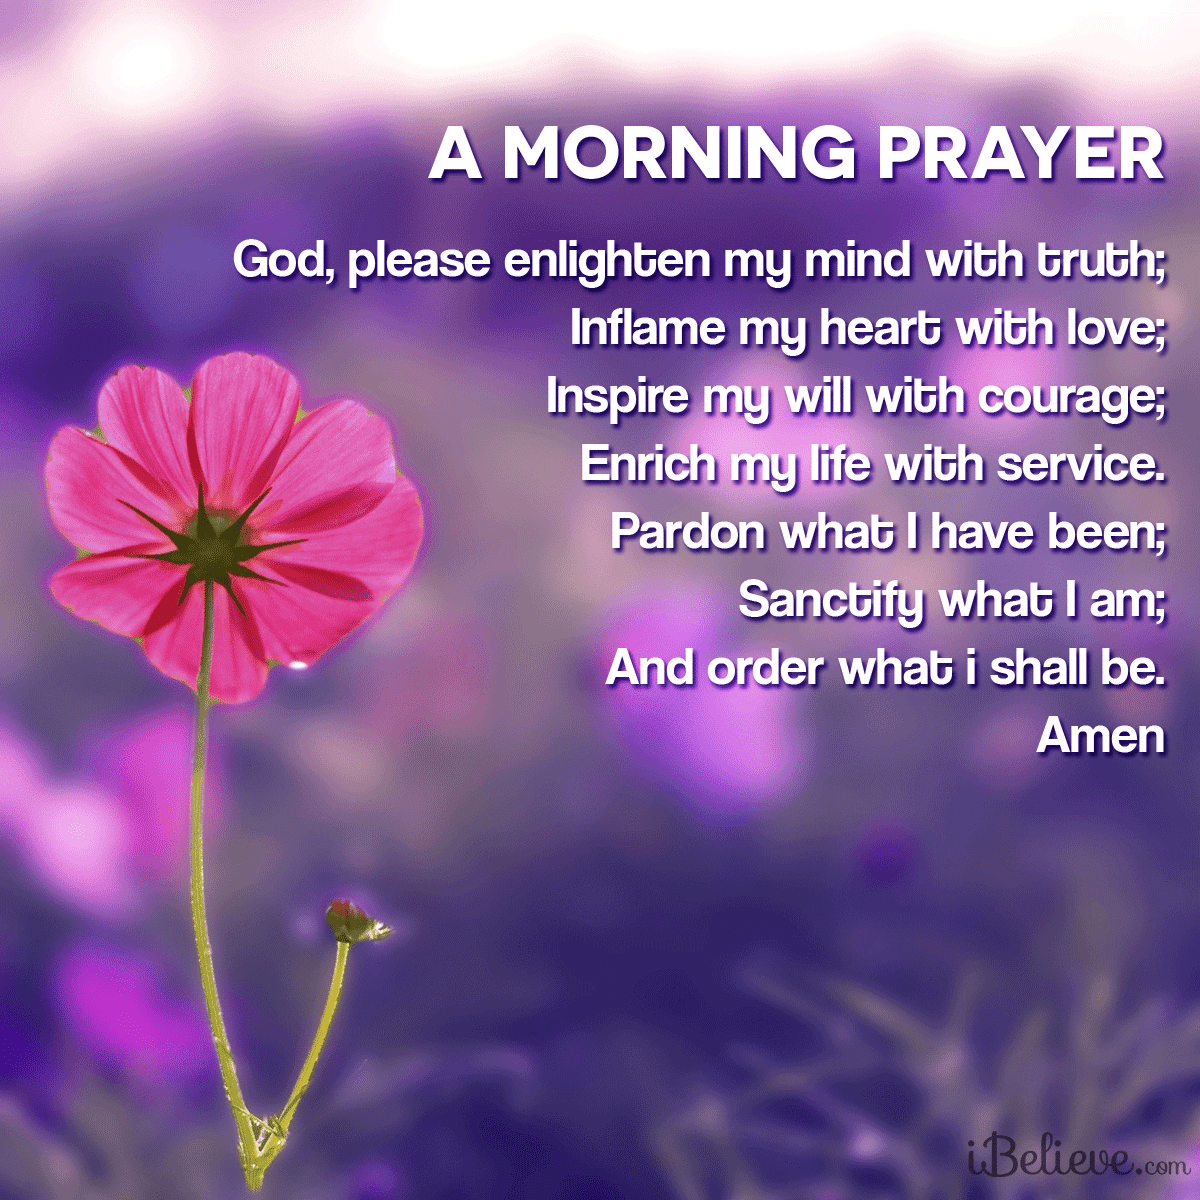 audio divine office morning prayer for today